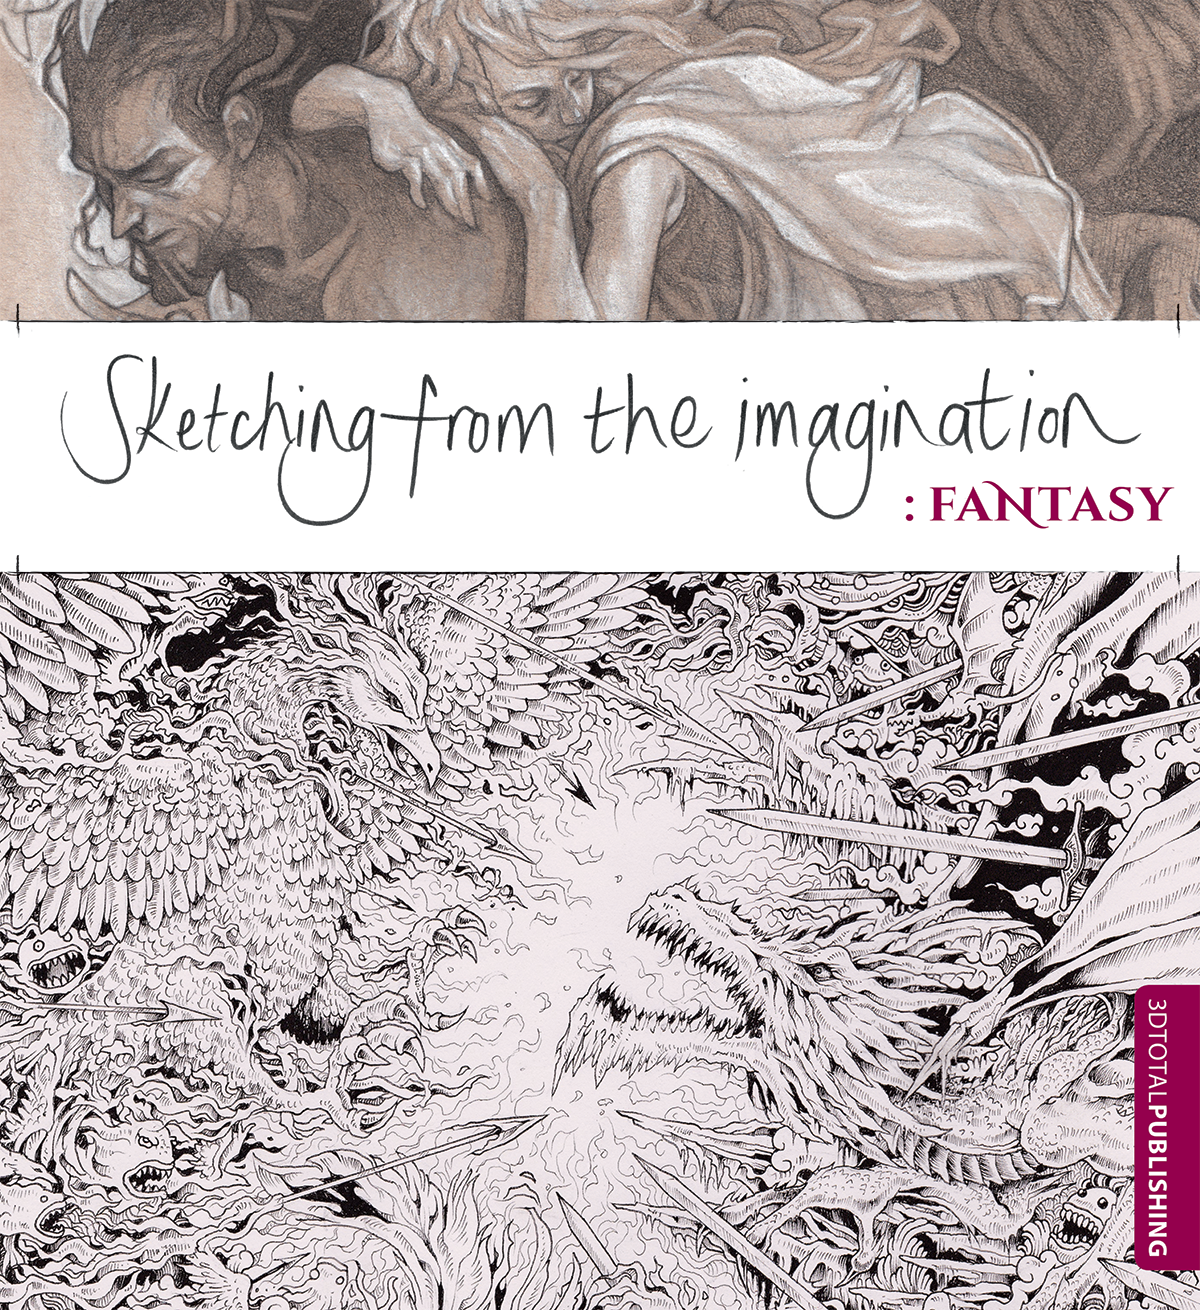 Pink and white 'Sketching From The Imagination: Fantasy' cover, showing a dragon fighting a giant bird, and two human lovers.